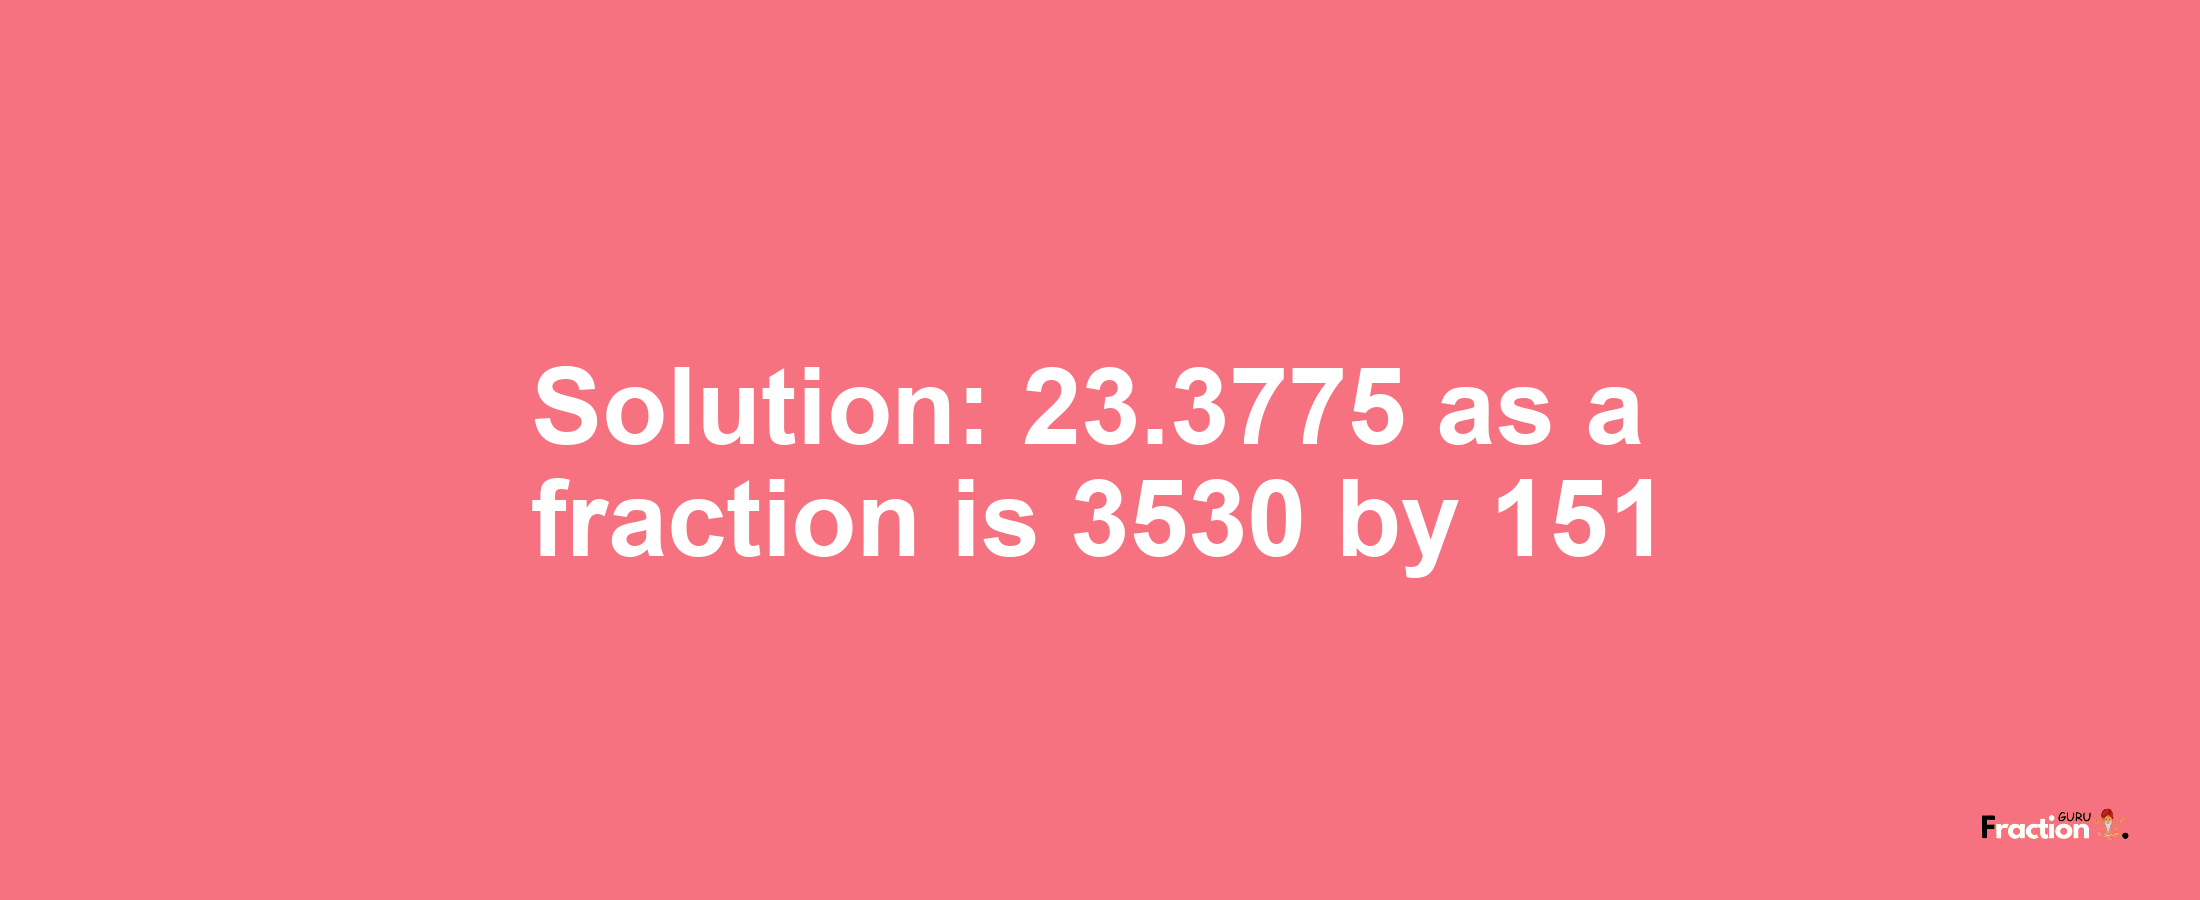 Solution:23.3775 as a fraction is 3530/151